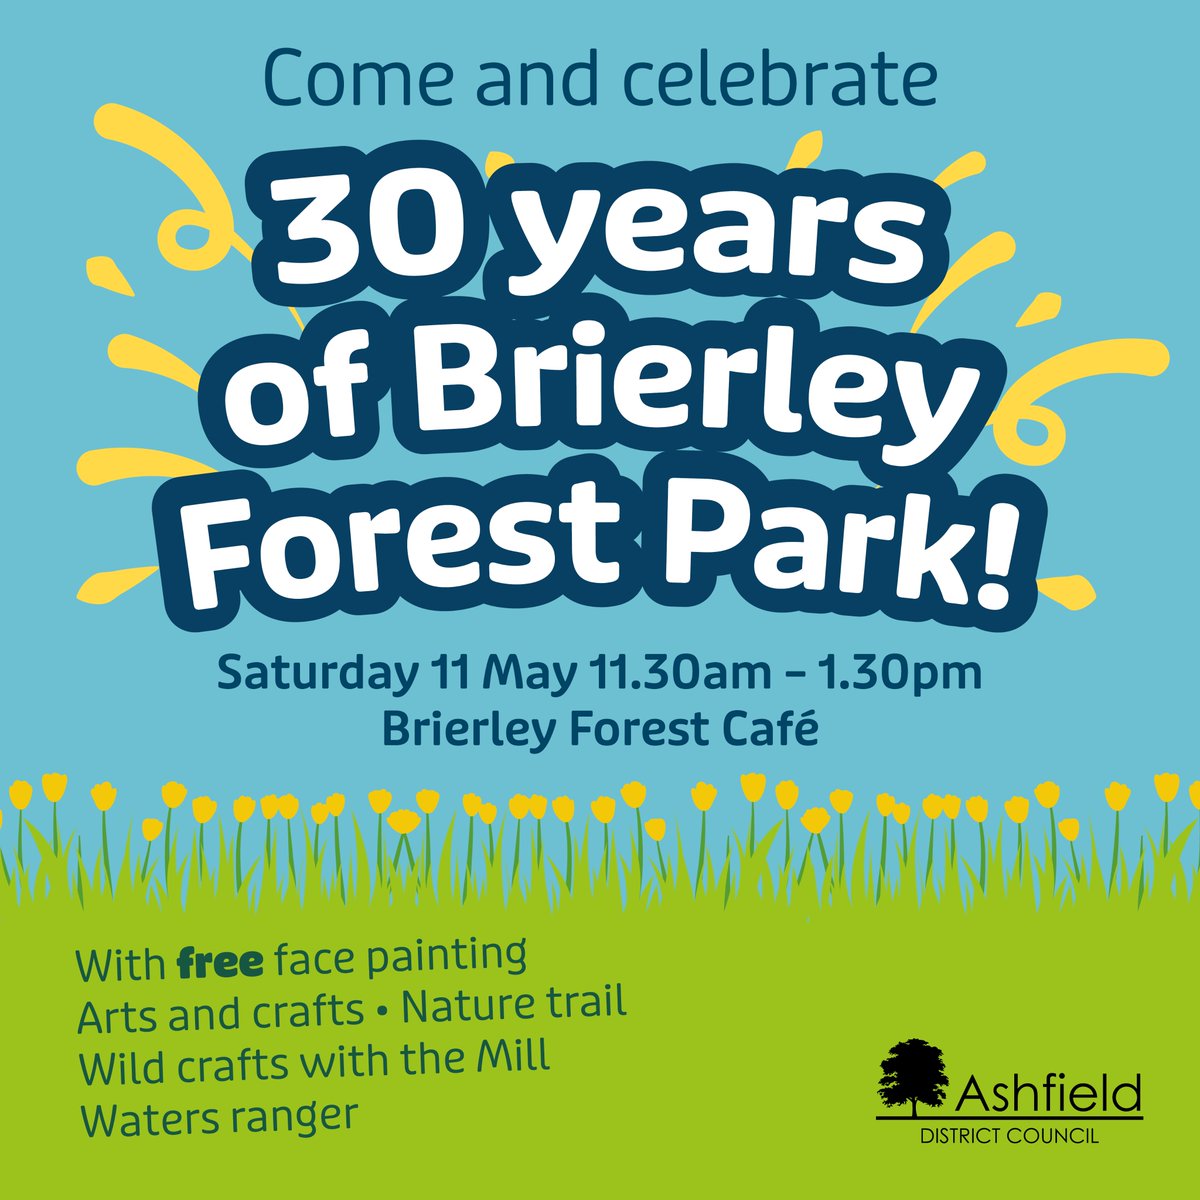 May 2024 marks 30 years since Brierley Forest Park opened! To celebrate this milestone we are hosting a small event with The Brierley Cafe🎂 📅 Join us on Saturday 11 May from 11.30am - 1.30pm for free face painting, arts and crafts, and a nature trail